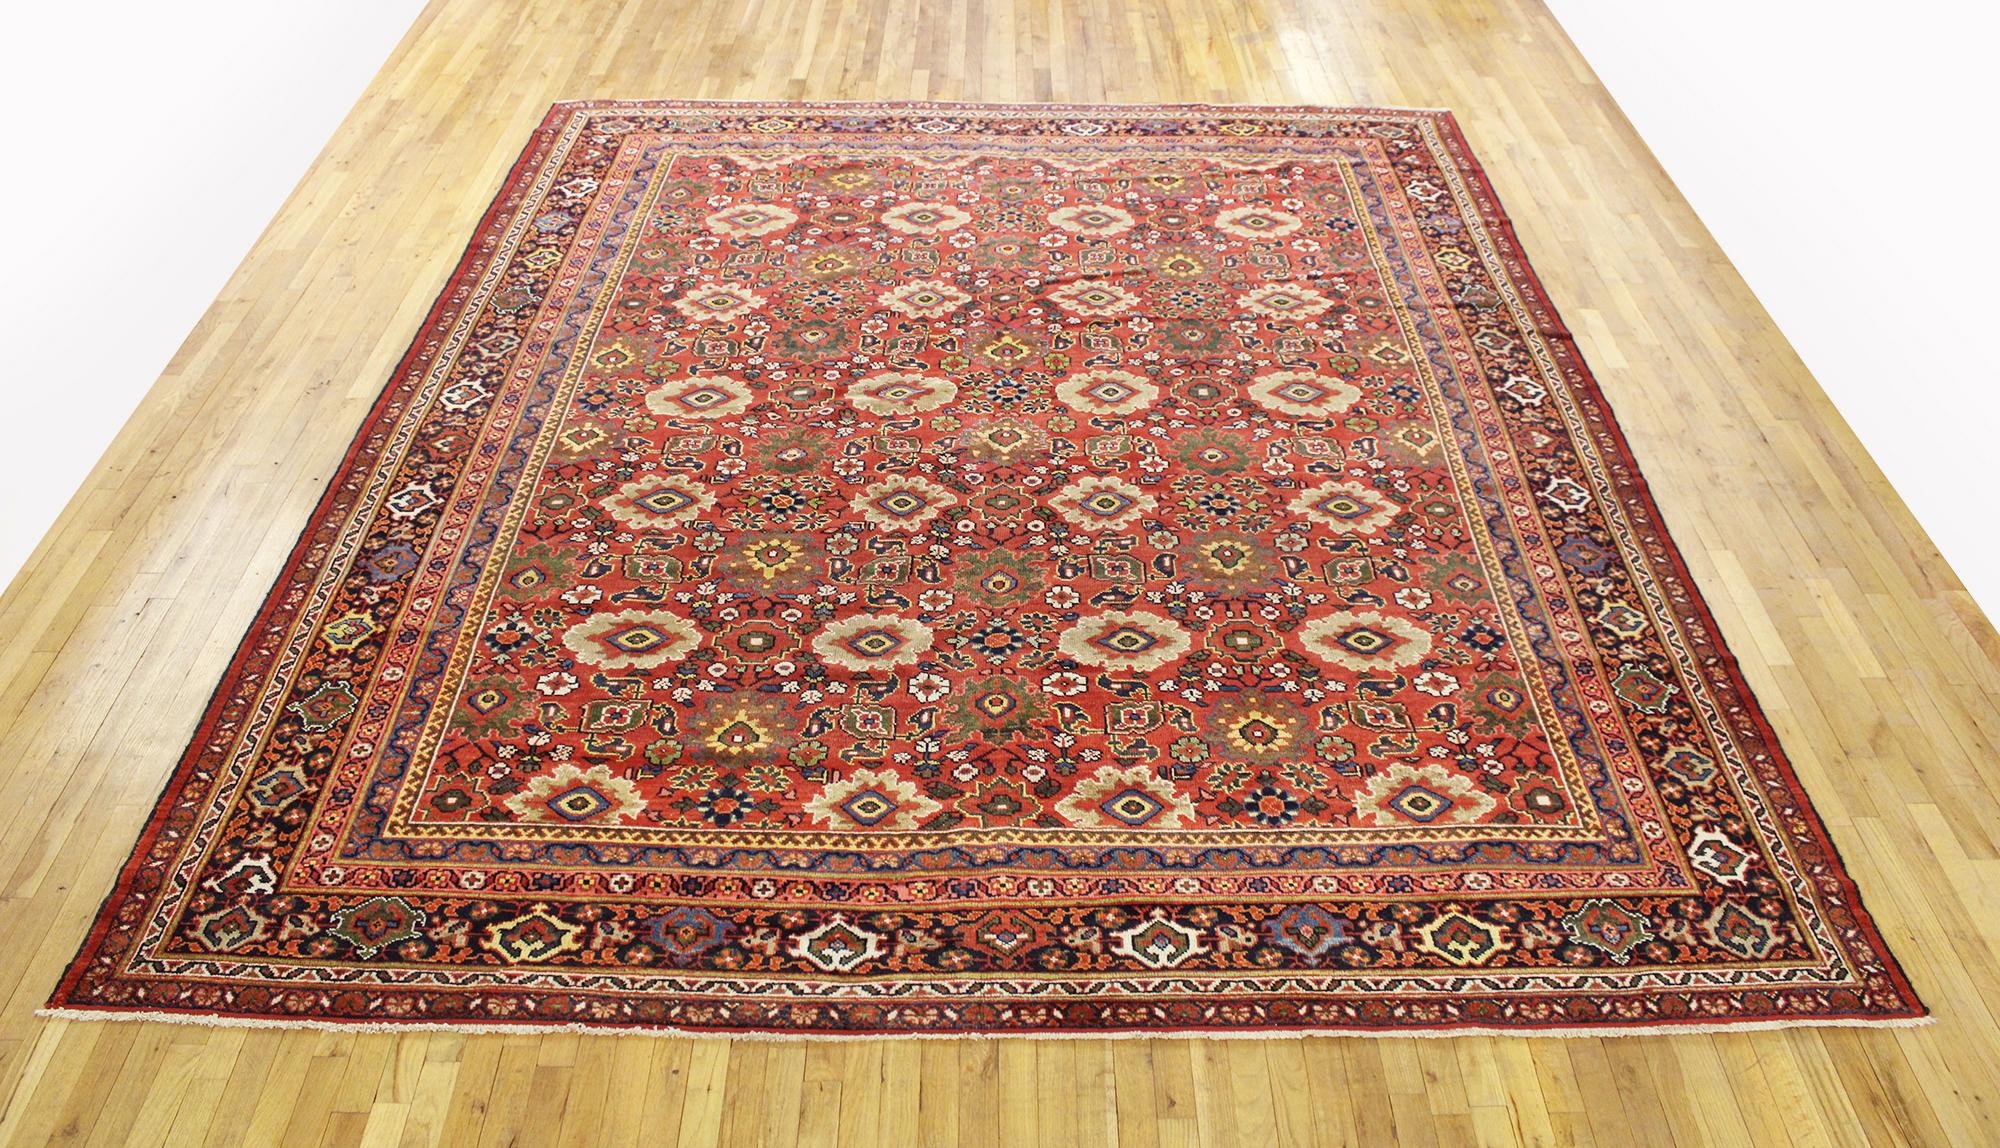 Antique Persian Sultanabad rug, room size, circa 1910

A one-of-a-kind antique Persian Sultanabad oriental carpet with a thick and lustrous wool pile, knotted by hand, with soft touch and great resistance to wear. This carpet features floral